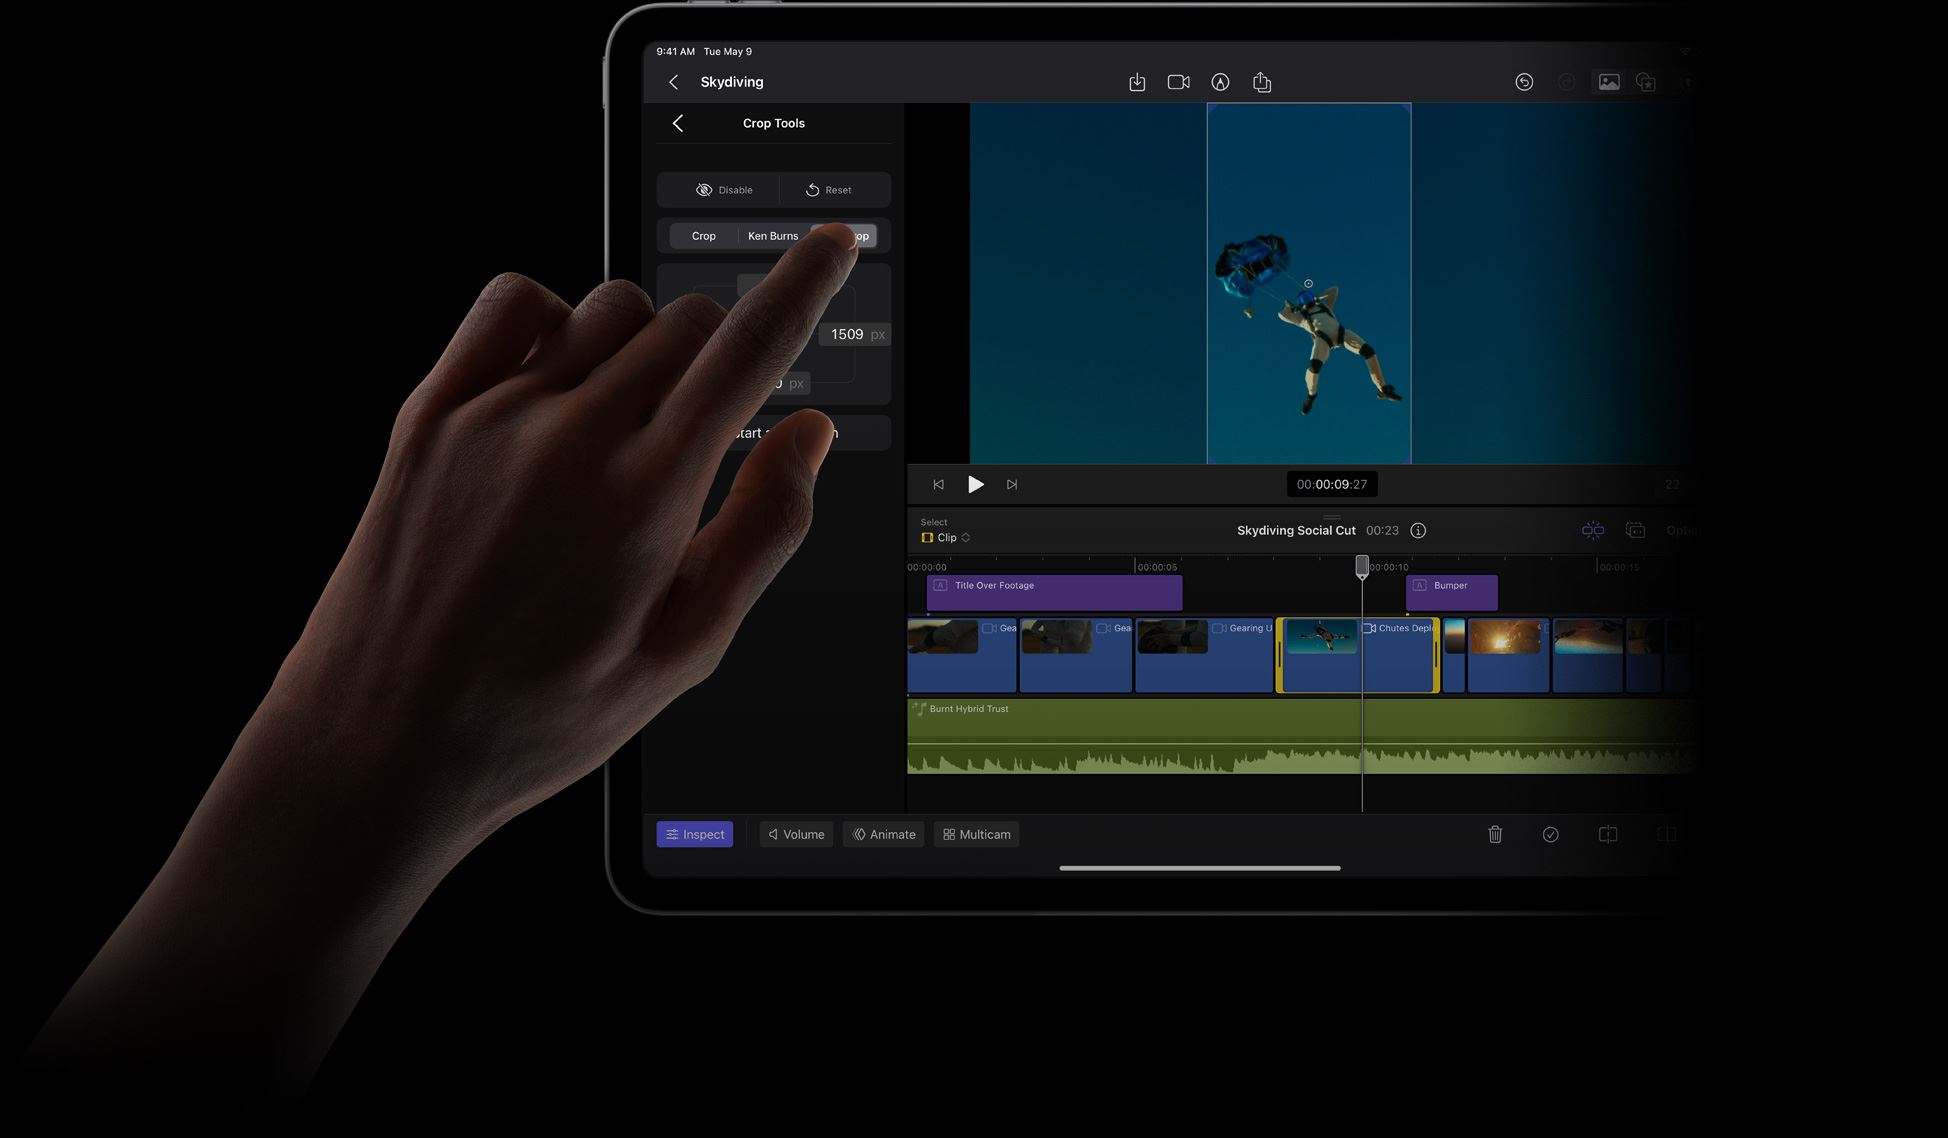 Finger touching iPad Pro display to select an item from the Crop Tools menu in Final Cut Pro.